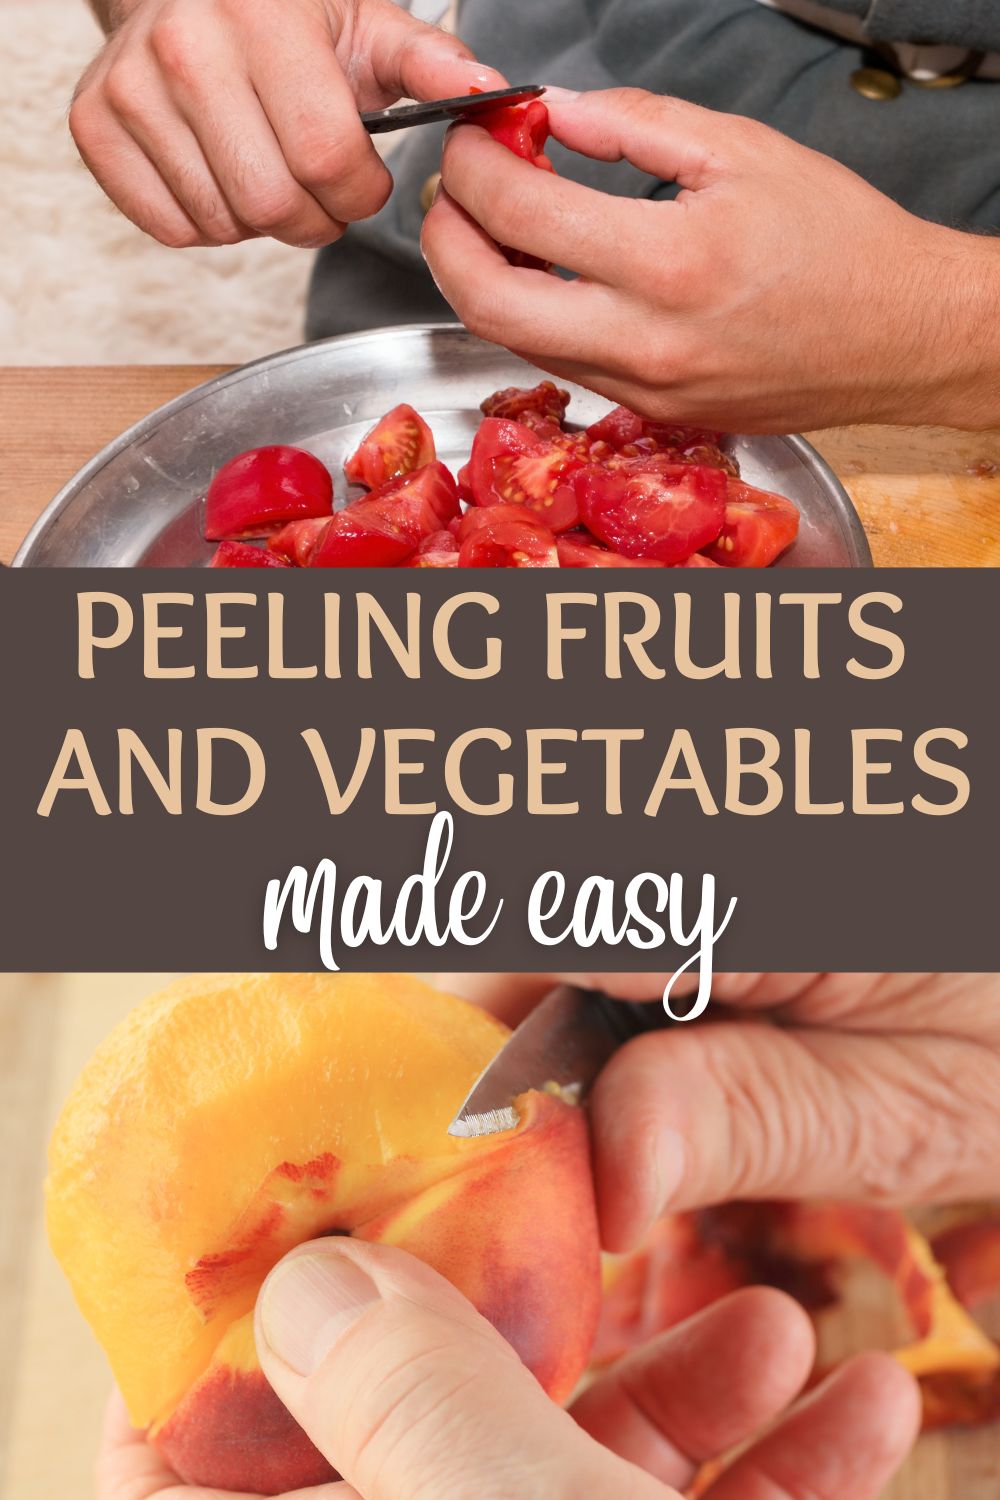 Peeling fruits and vegetables made easy